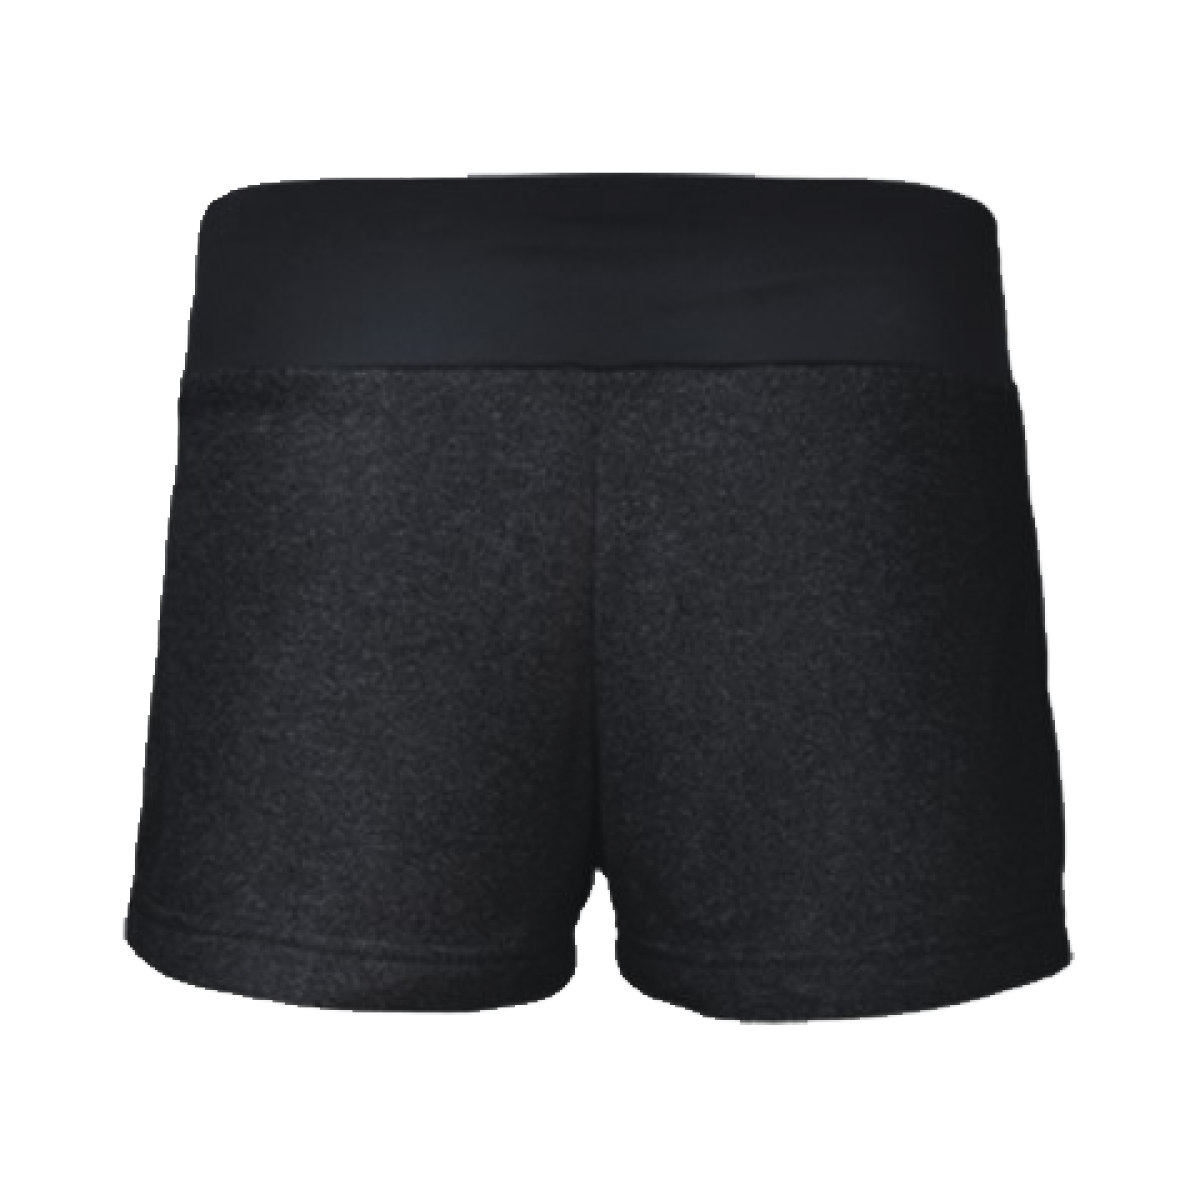 Ladie's Sports Shorts